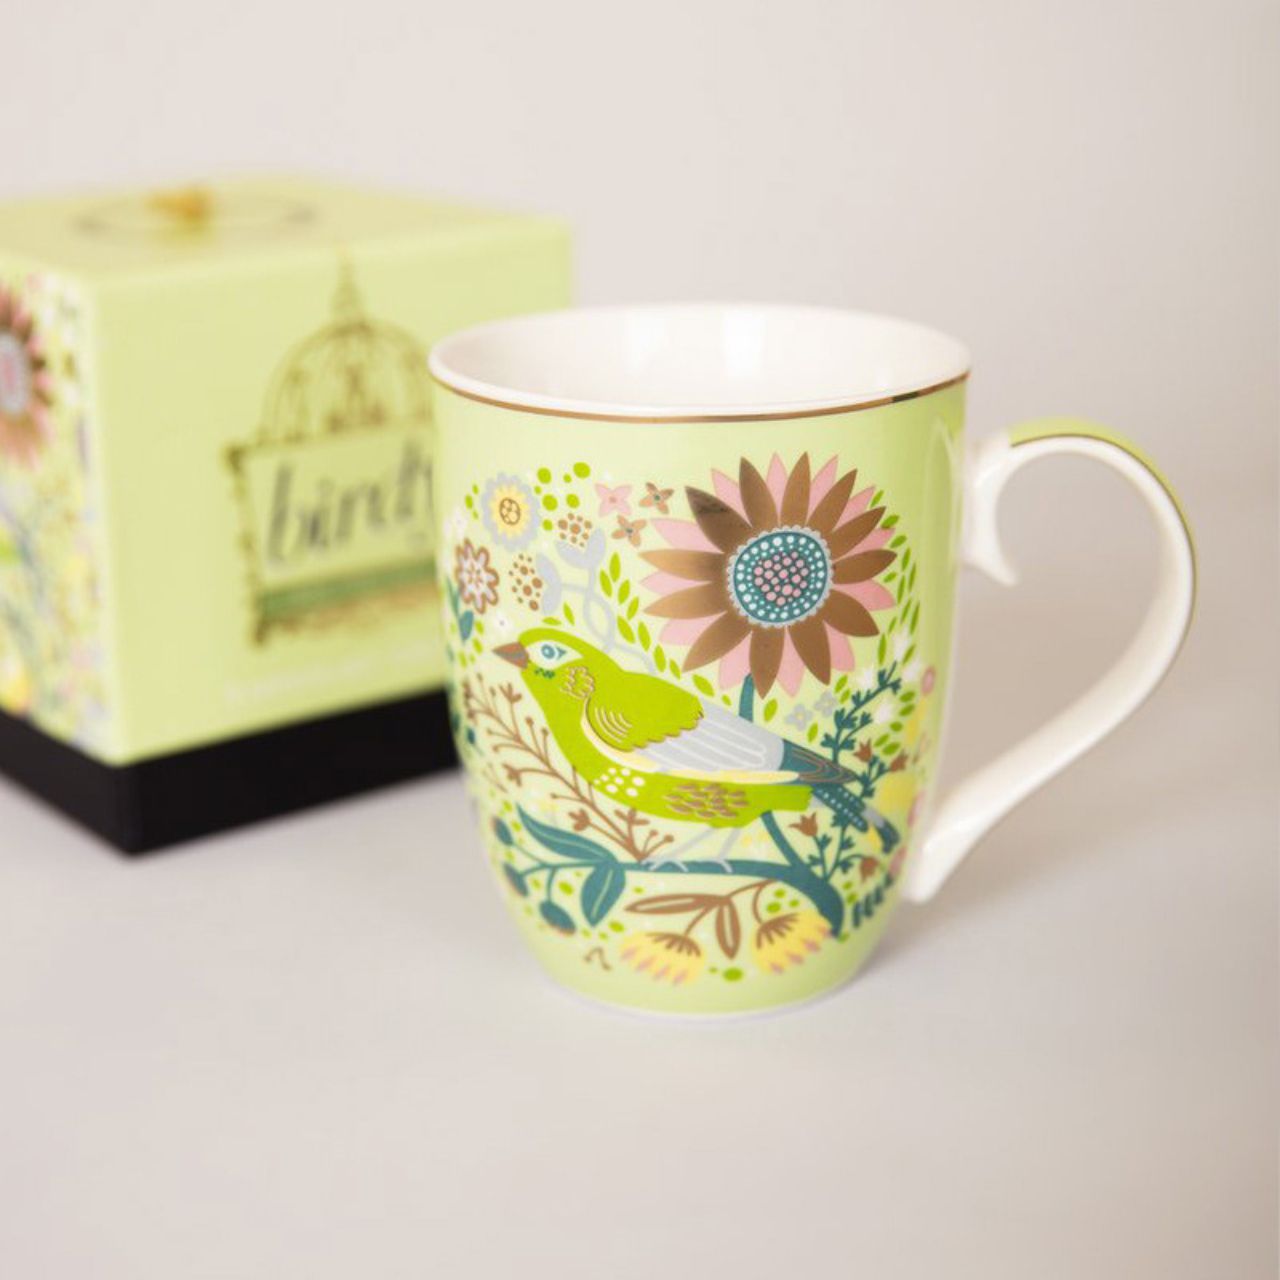 Tipperary Crystal Greenfinch Single Birdy Mug New to our collection, these individual mugs come beautifully illustrated and presented in a rigid Tipperary Crystal gift box. Makes a wonderful gift to be enjoyed over a peaceful cup of their favourite beverage.